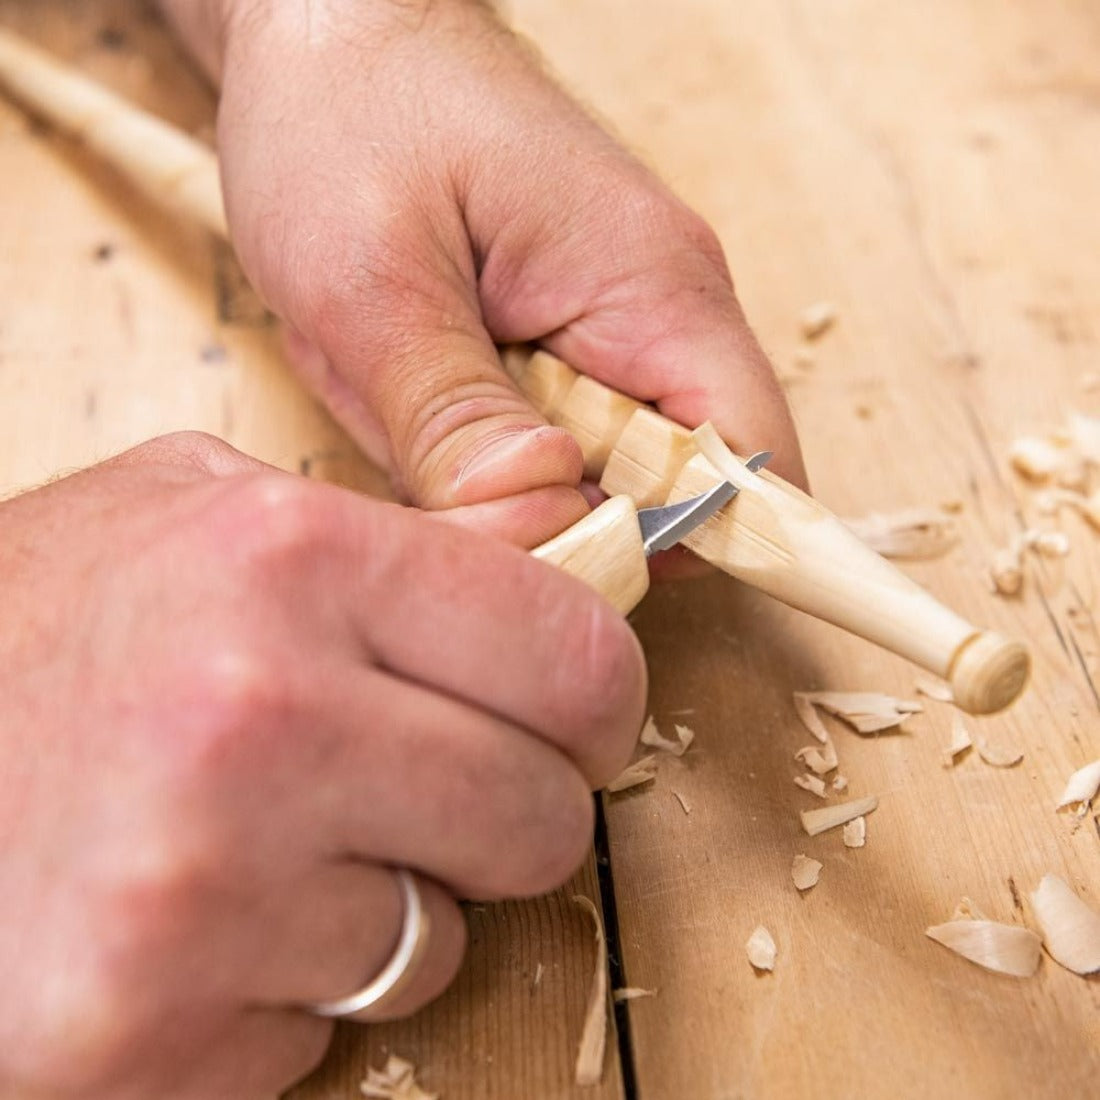 the carver is carving a stick with the smallest detail knife on a bench.